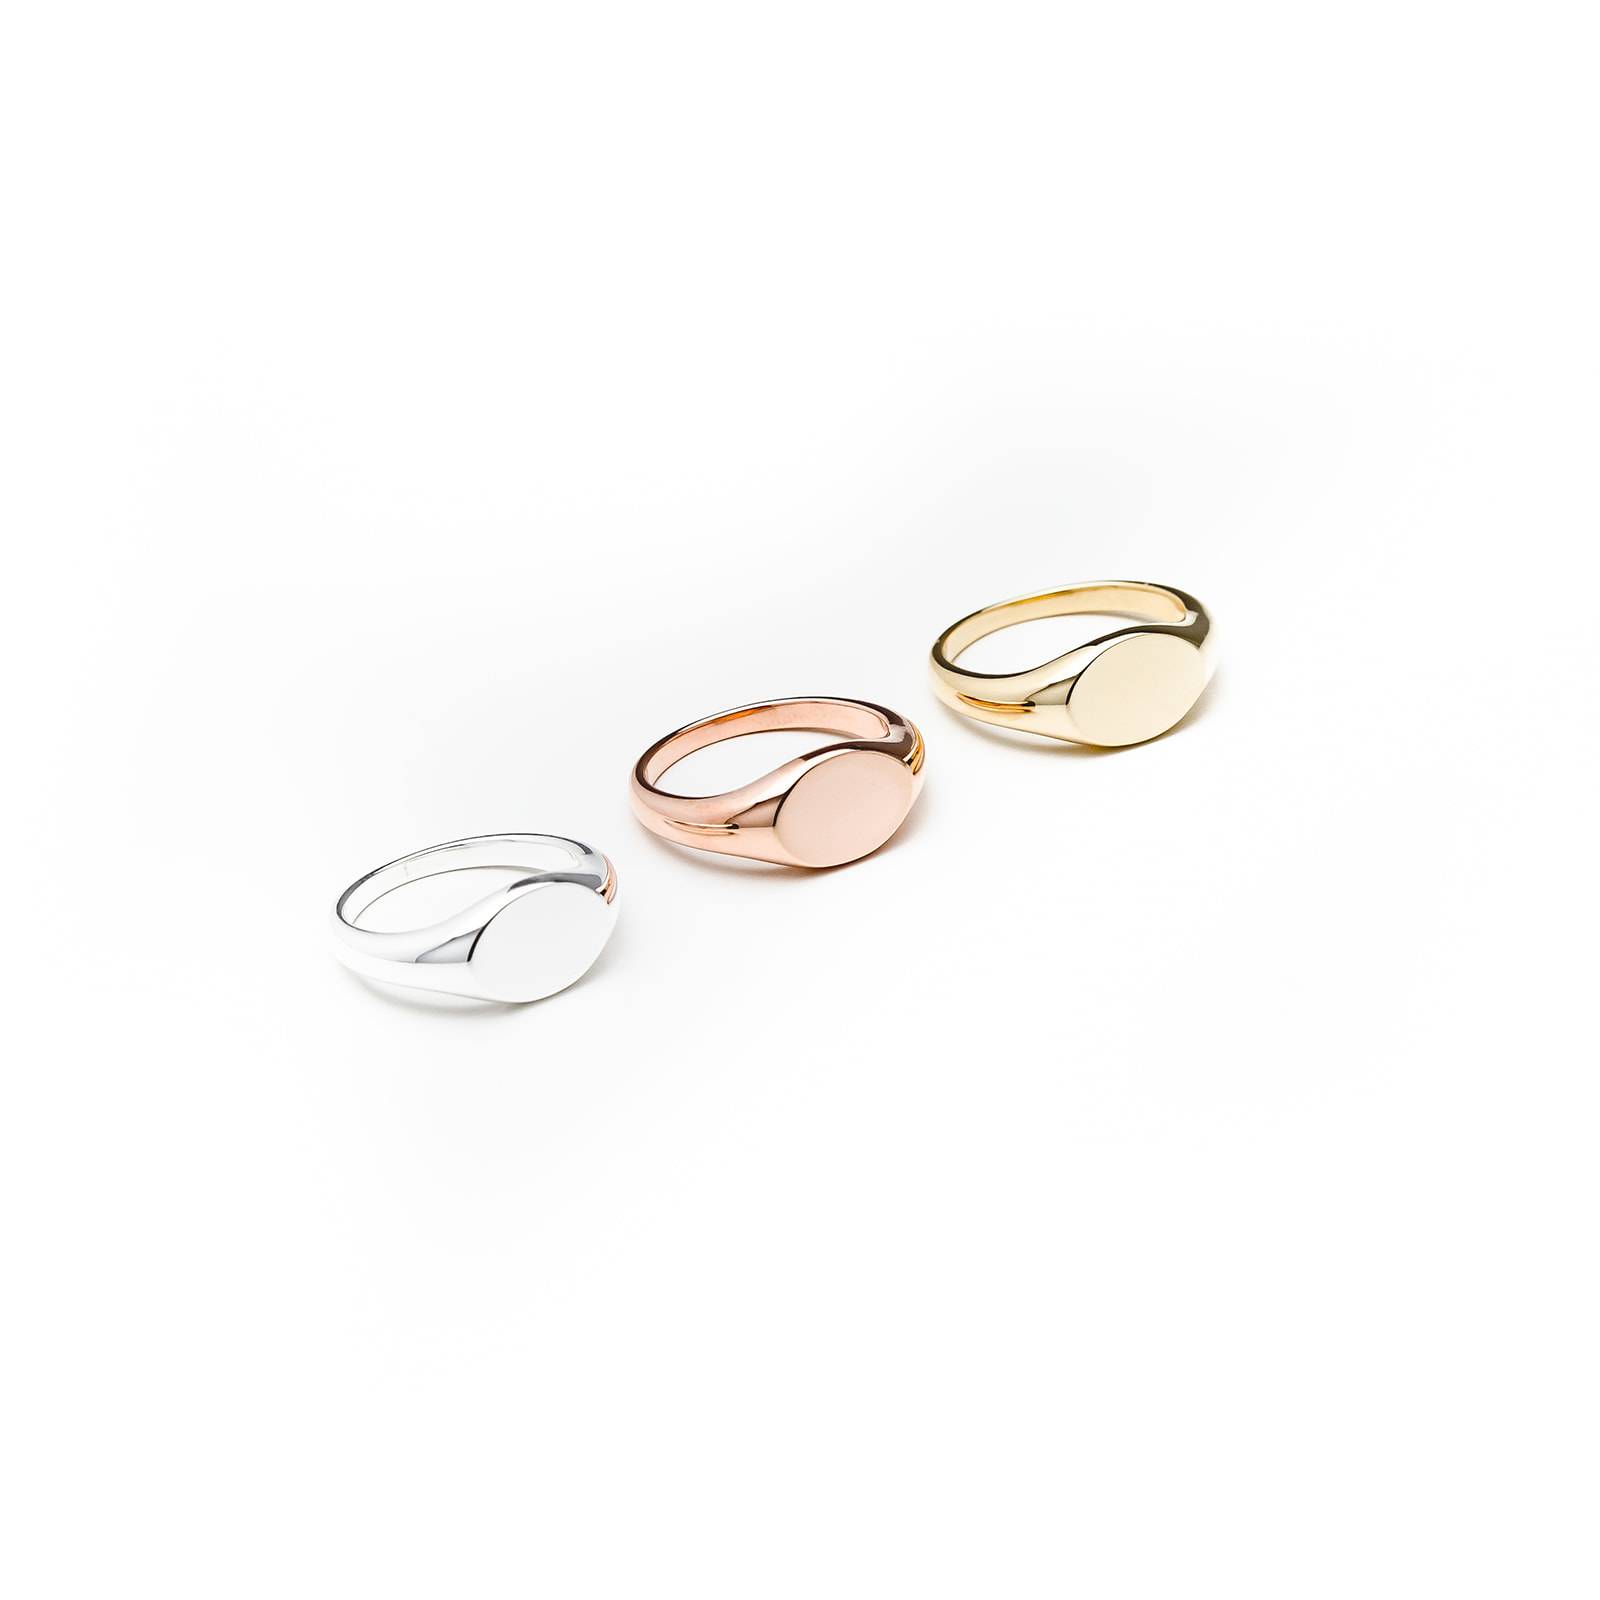 3 colours of signet rings to engrave